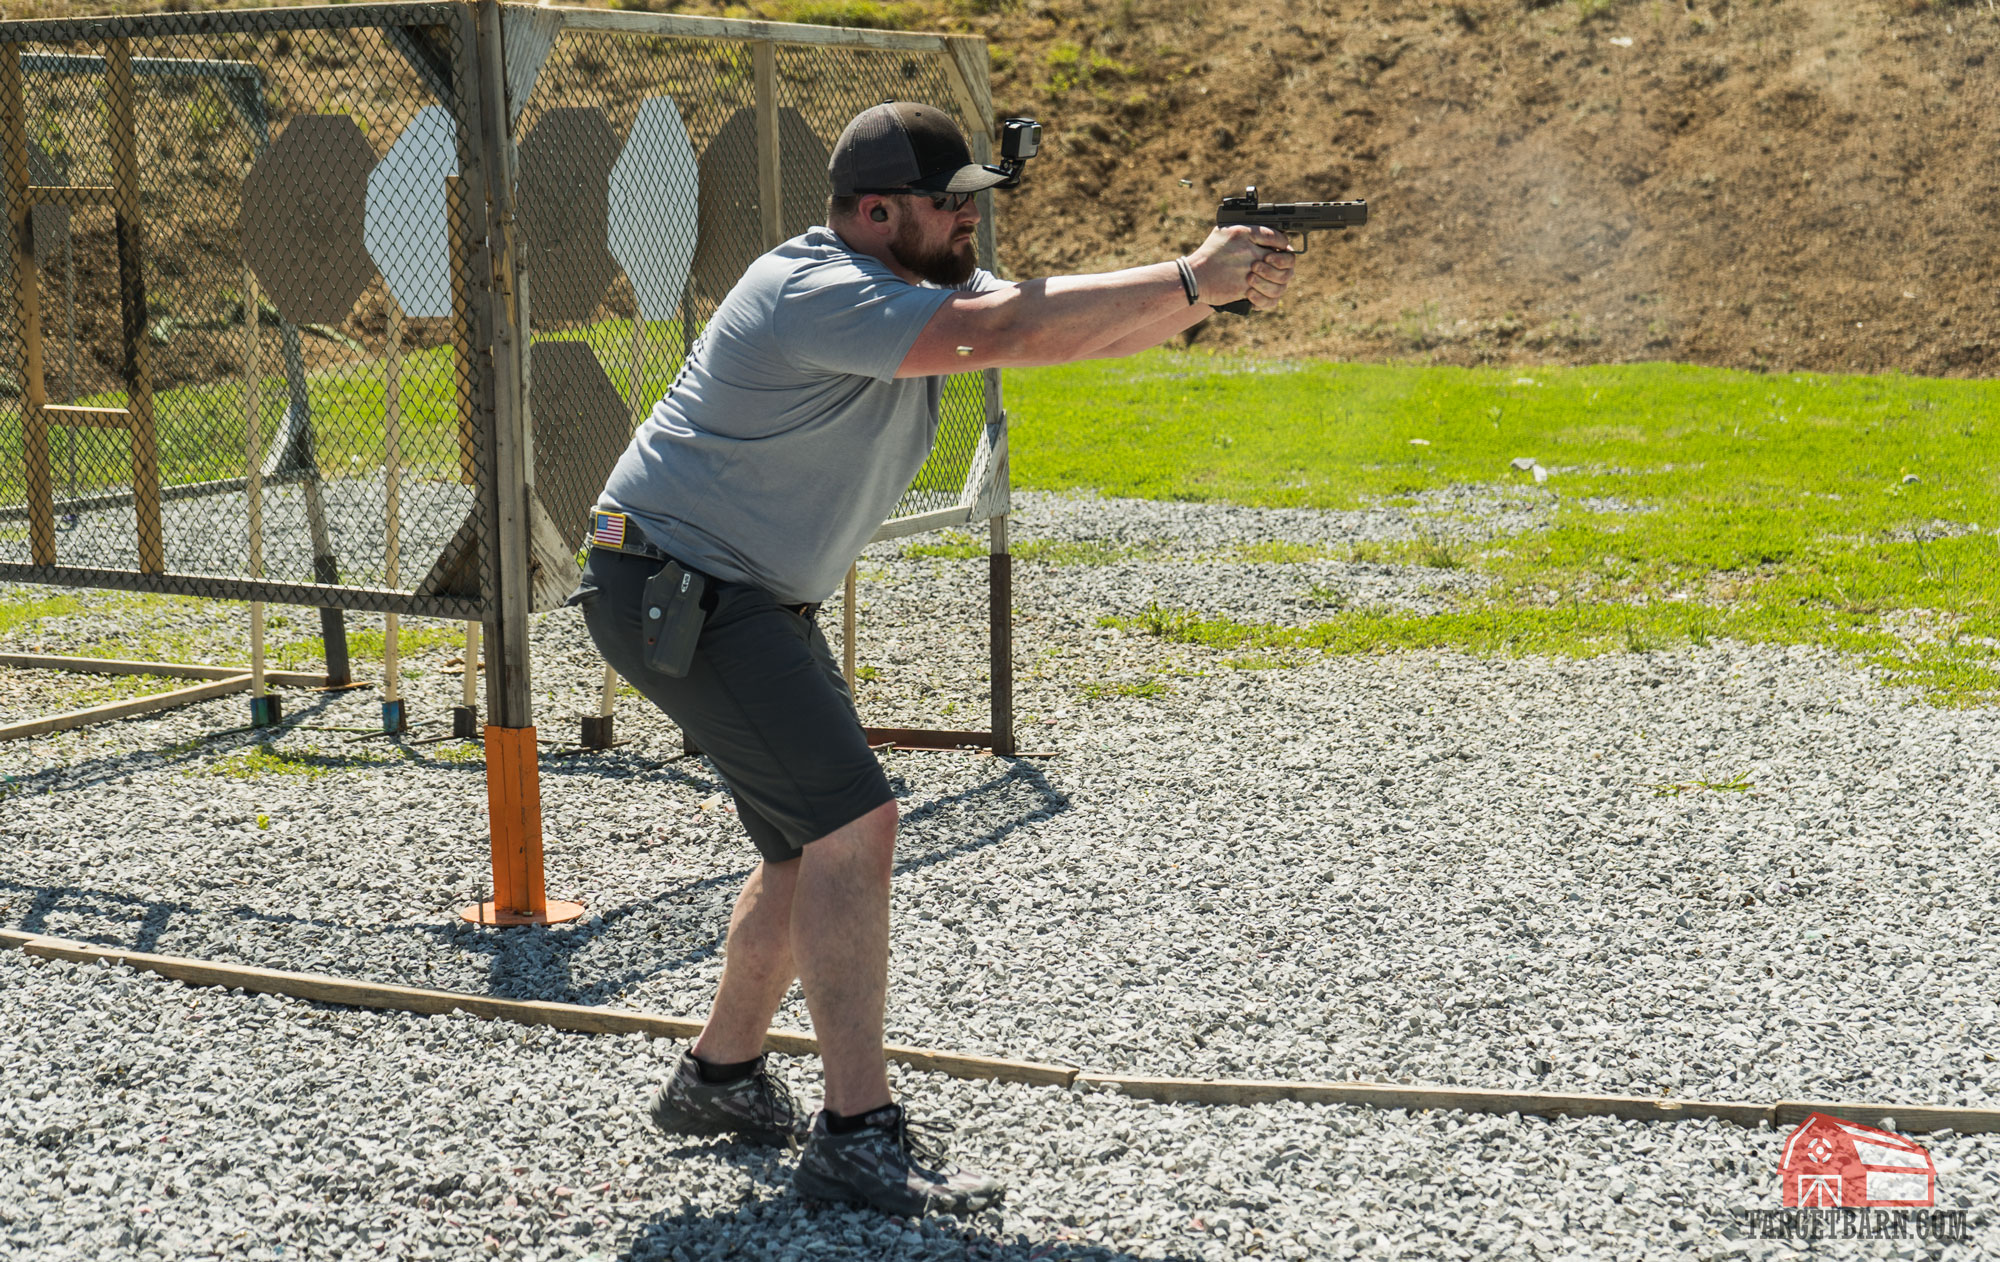 a competitor shooting his pistol during a stage at a uspsa match